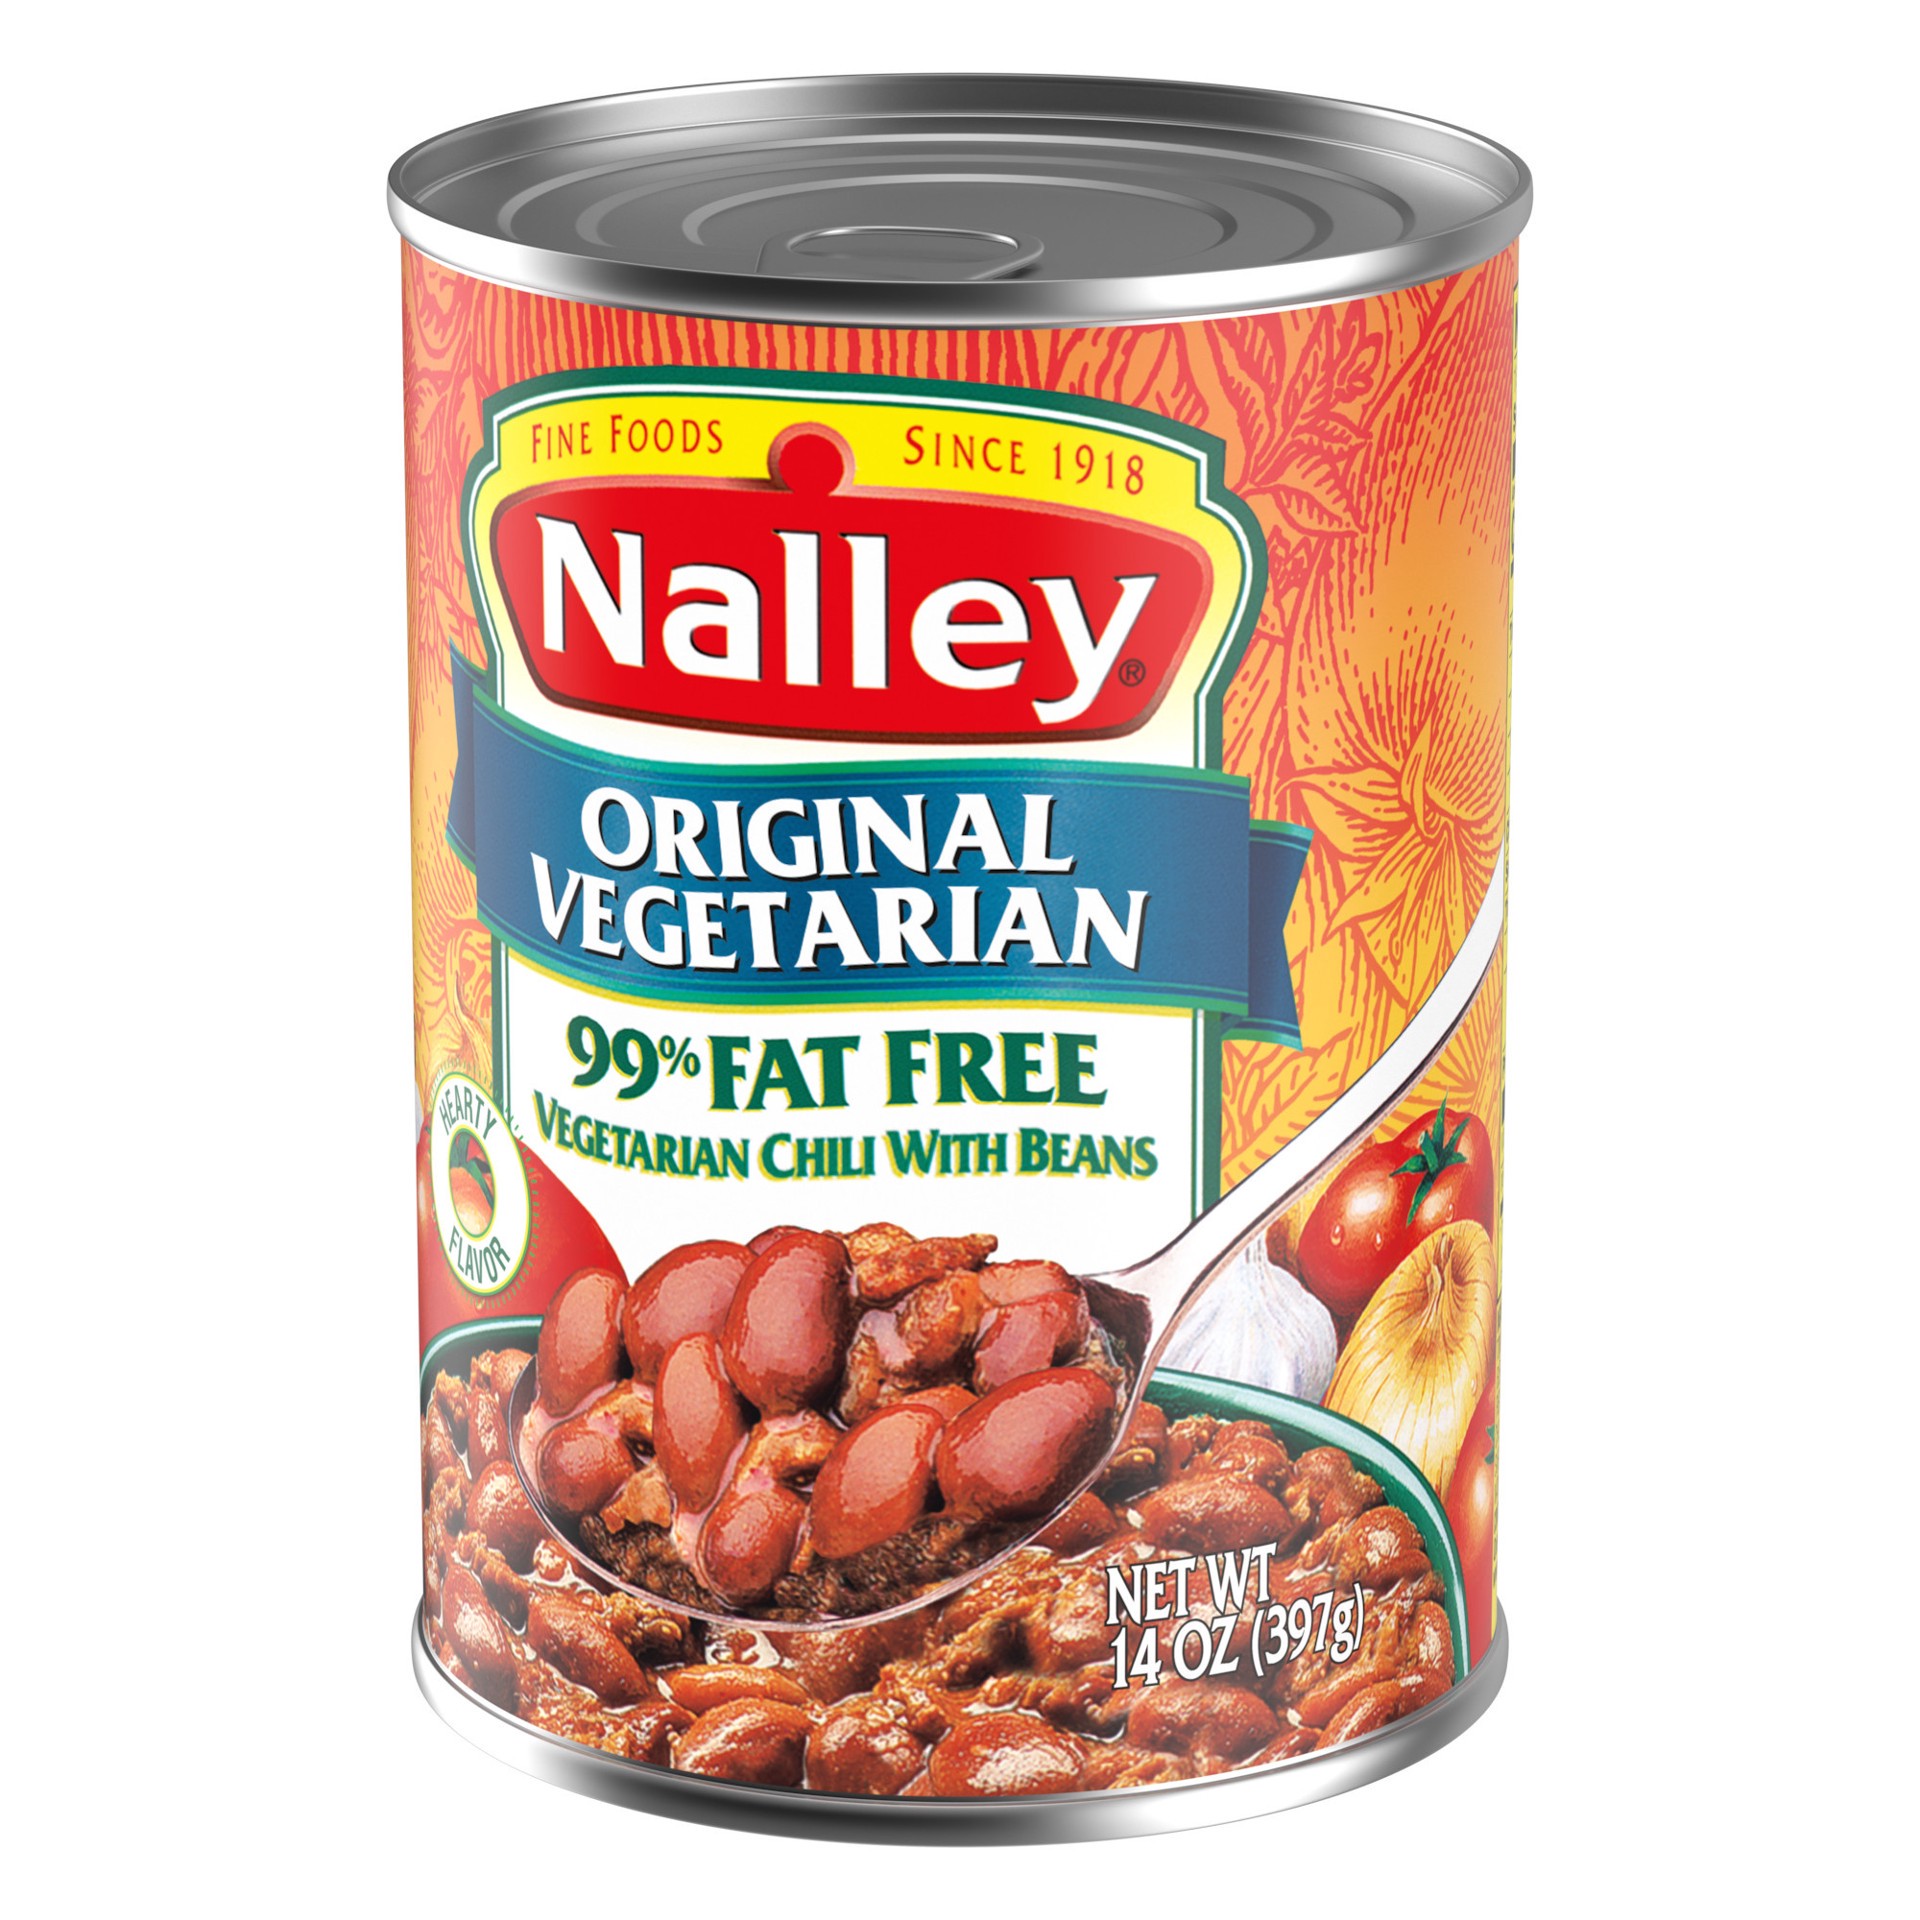 slide 4 of 5, Nalley Original Vegetarian 99% Fat Free Hearty Flavor Chili with Beans 14 oz, 14 oz